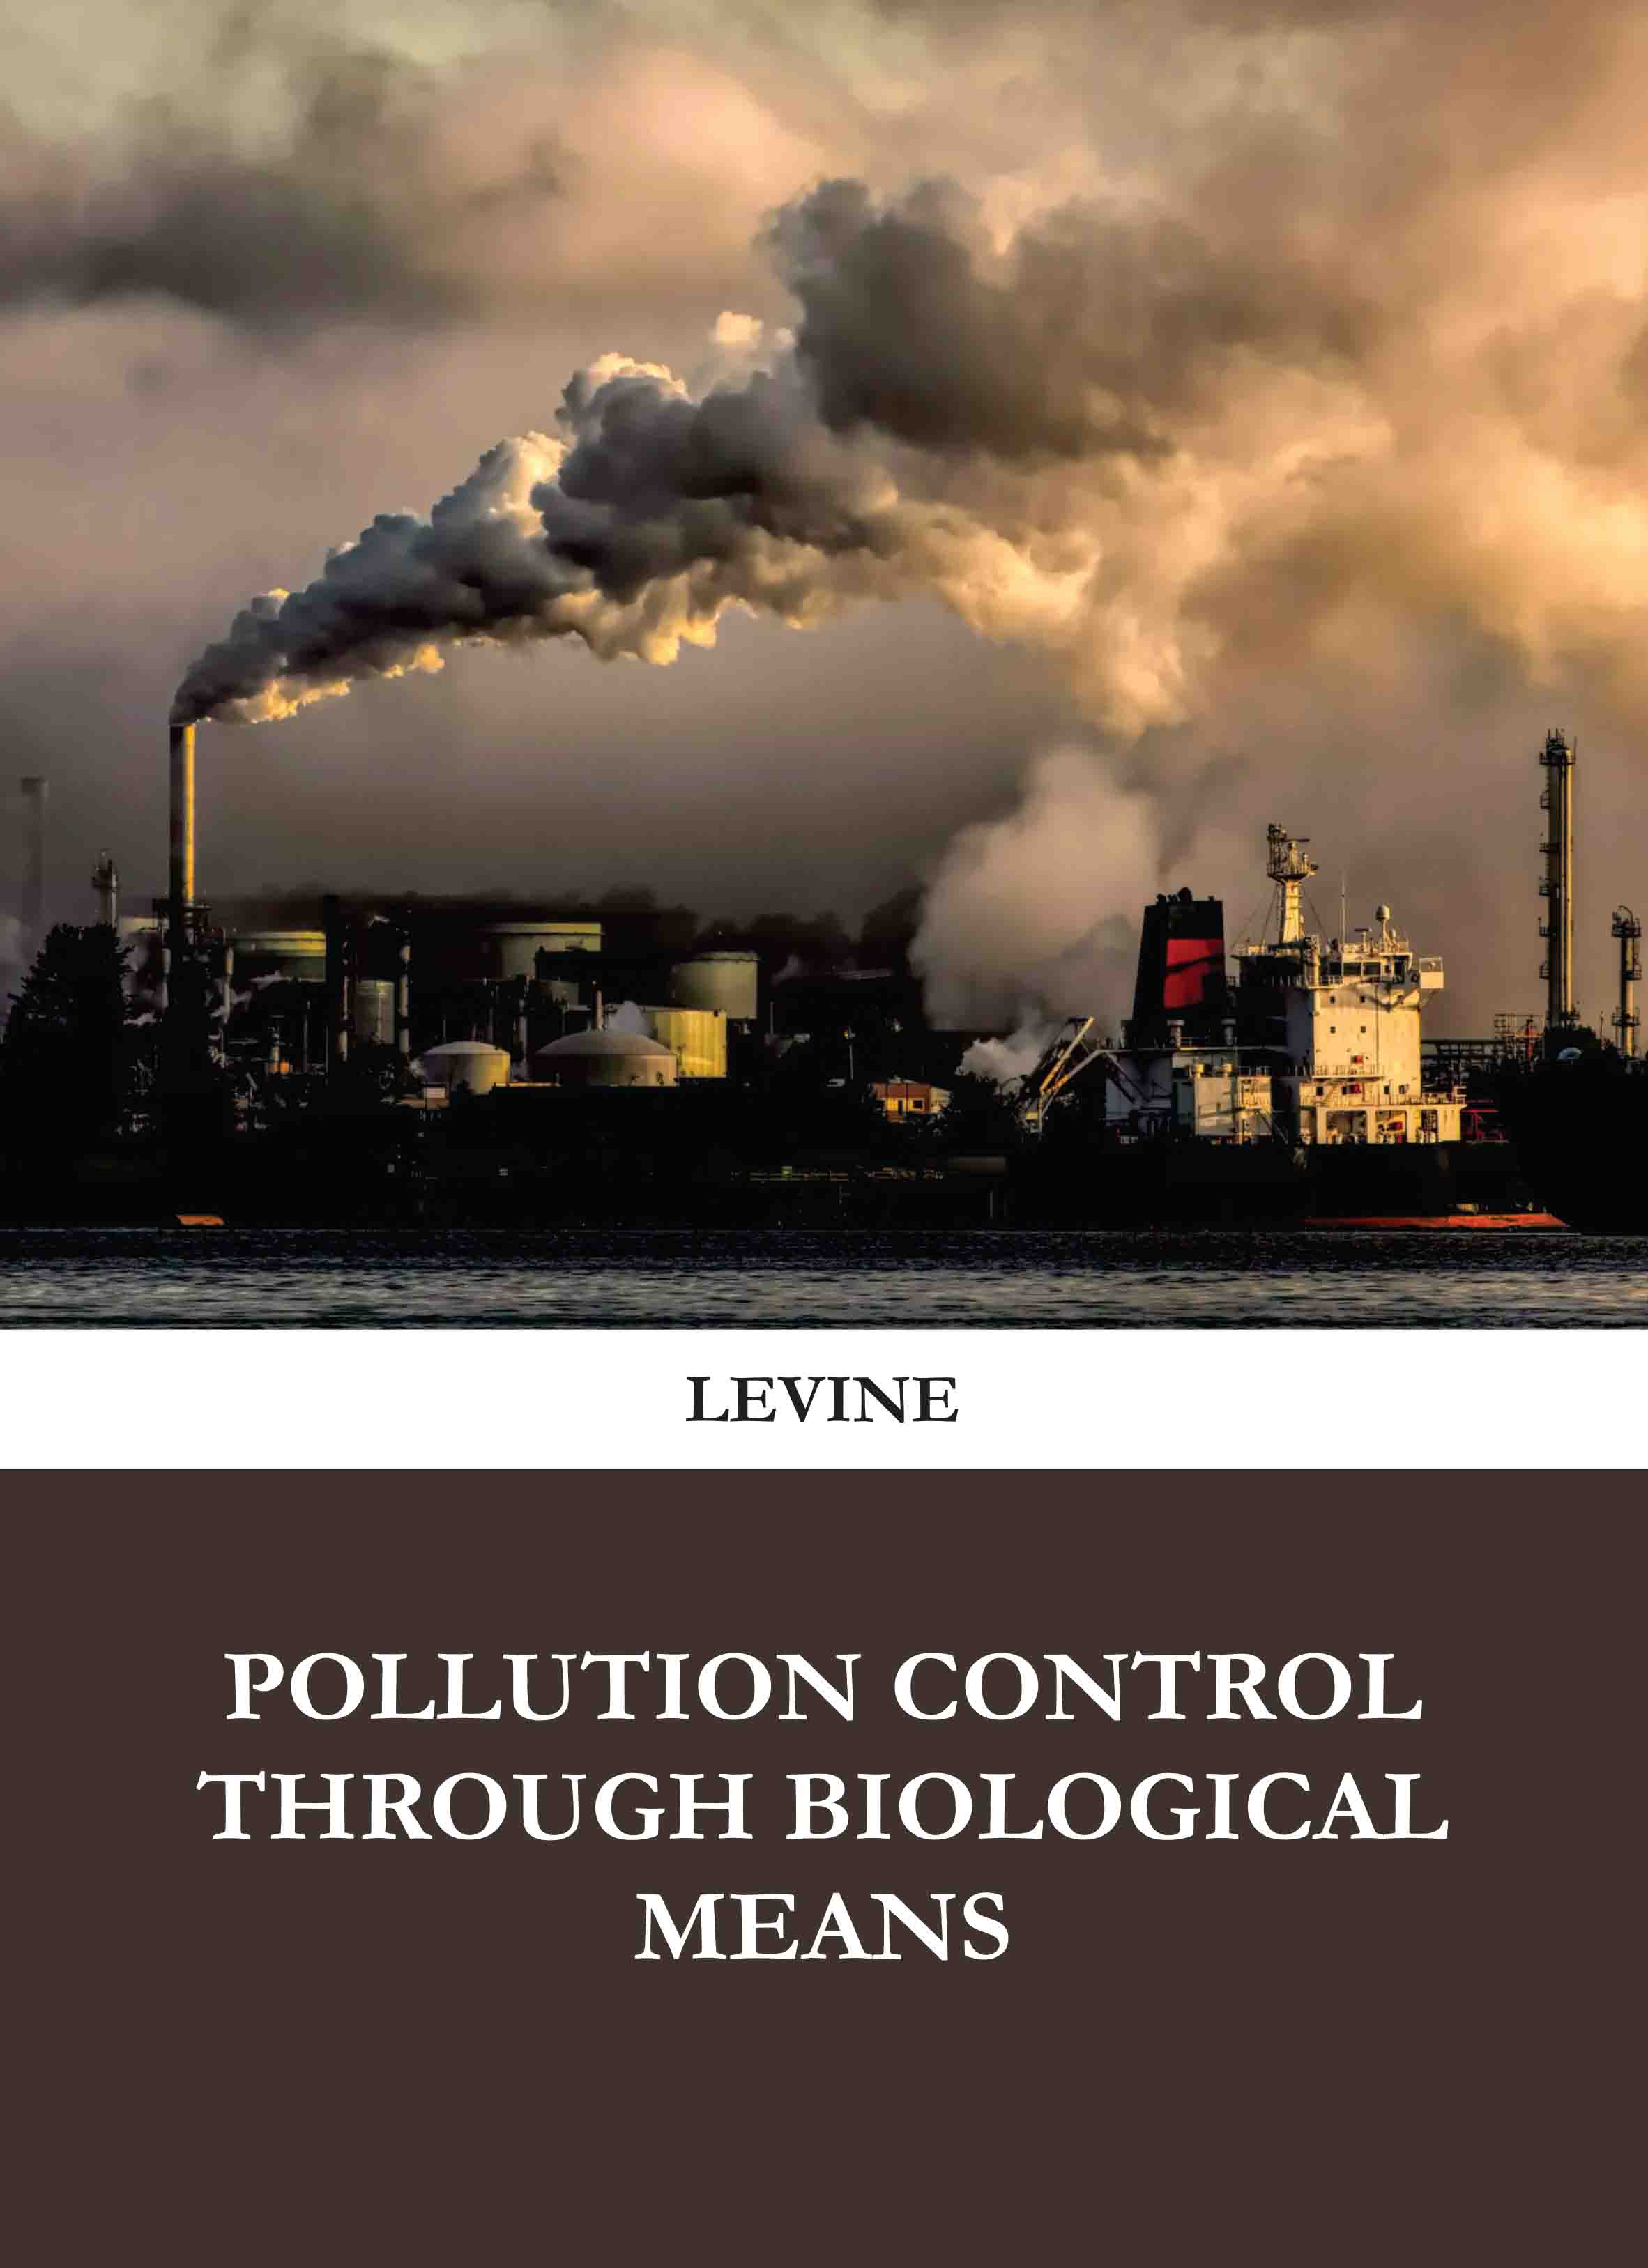 Pollution Control through Biological Means